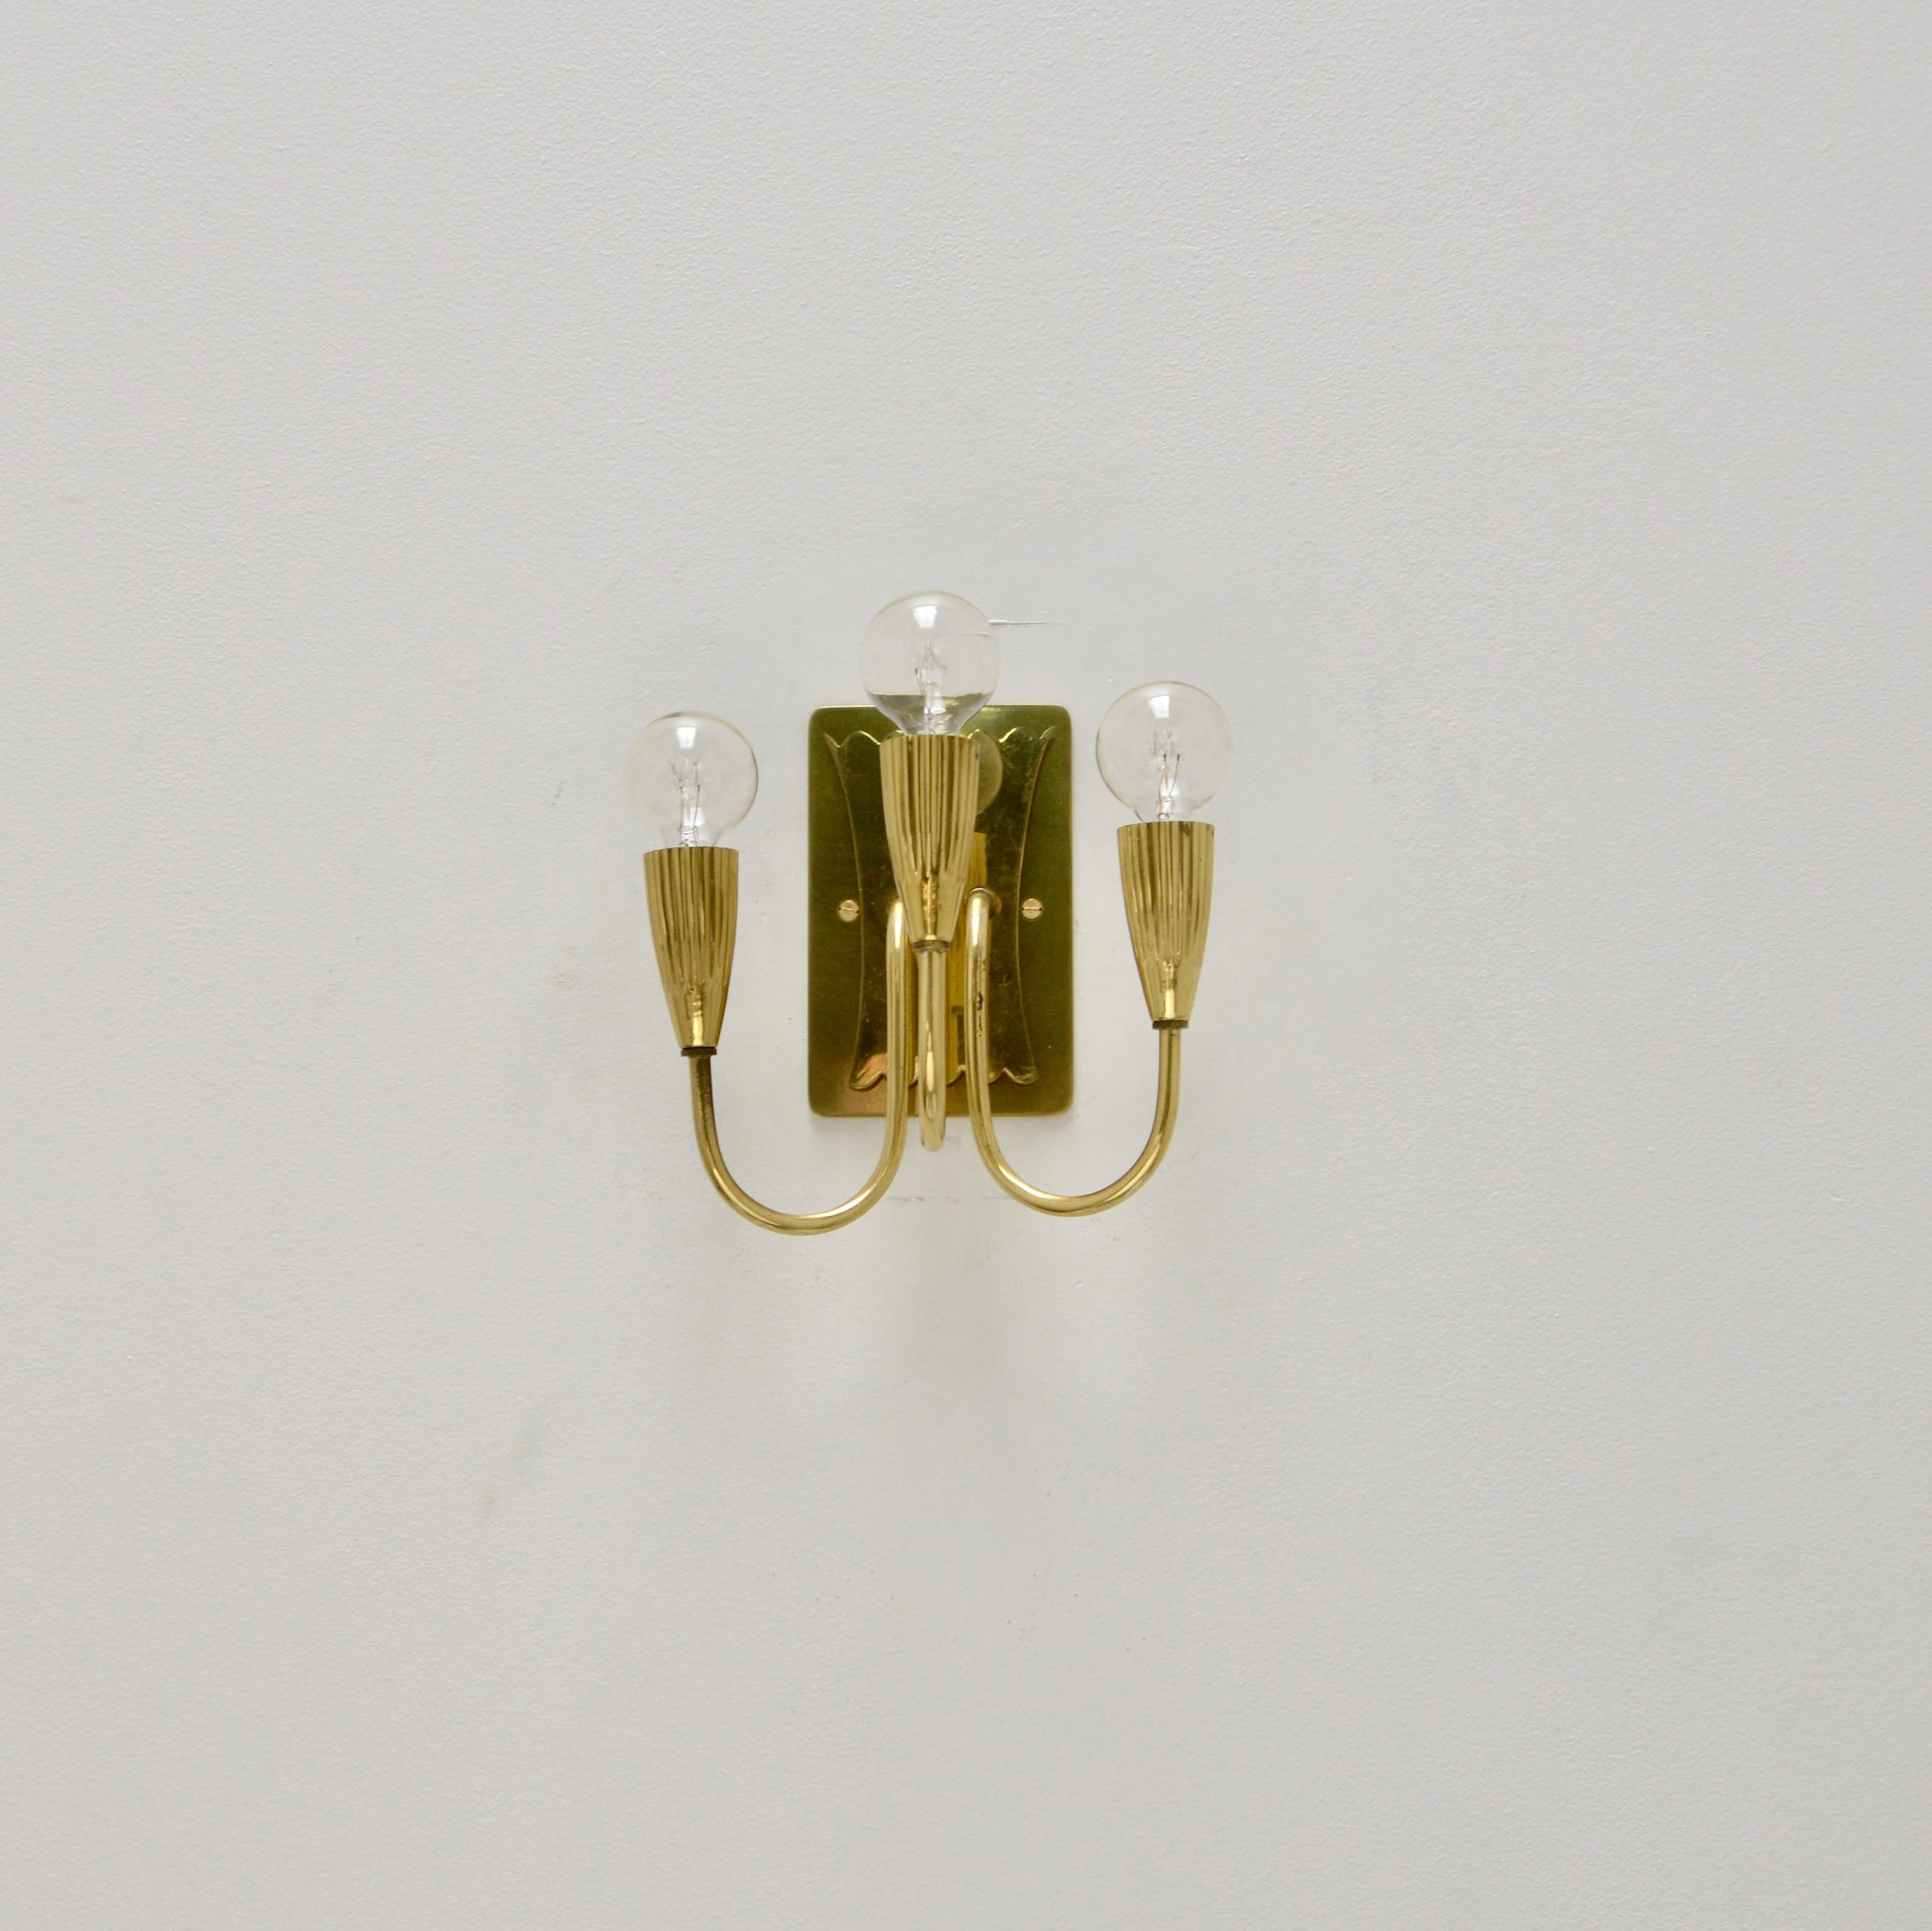 Pair of Botanical brass sconces from Italy from the 1950s. Partially restored, original finish. (3) E12 candelabra based sockets per sconce. Priced as a pair. Wired for use in the US. Lightbulbs included with order.
Measurements:
Height 9”
Depth